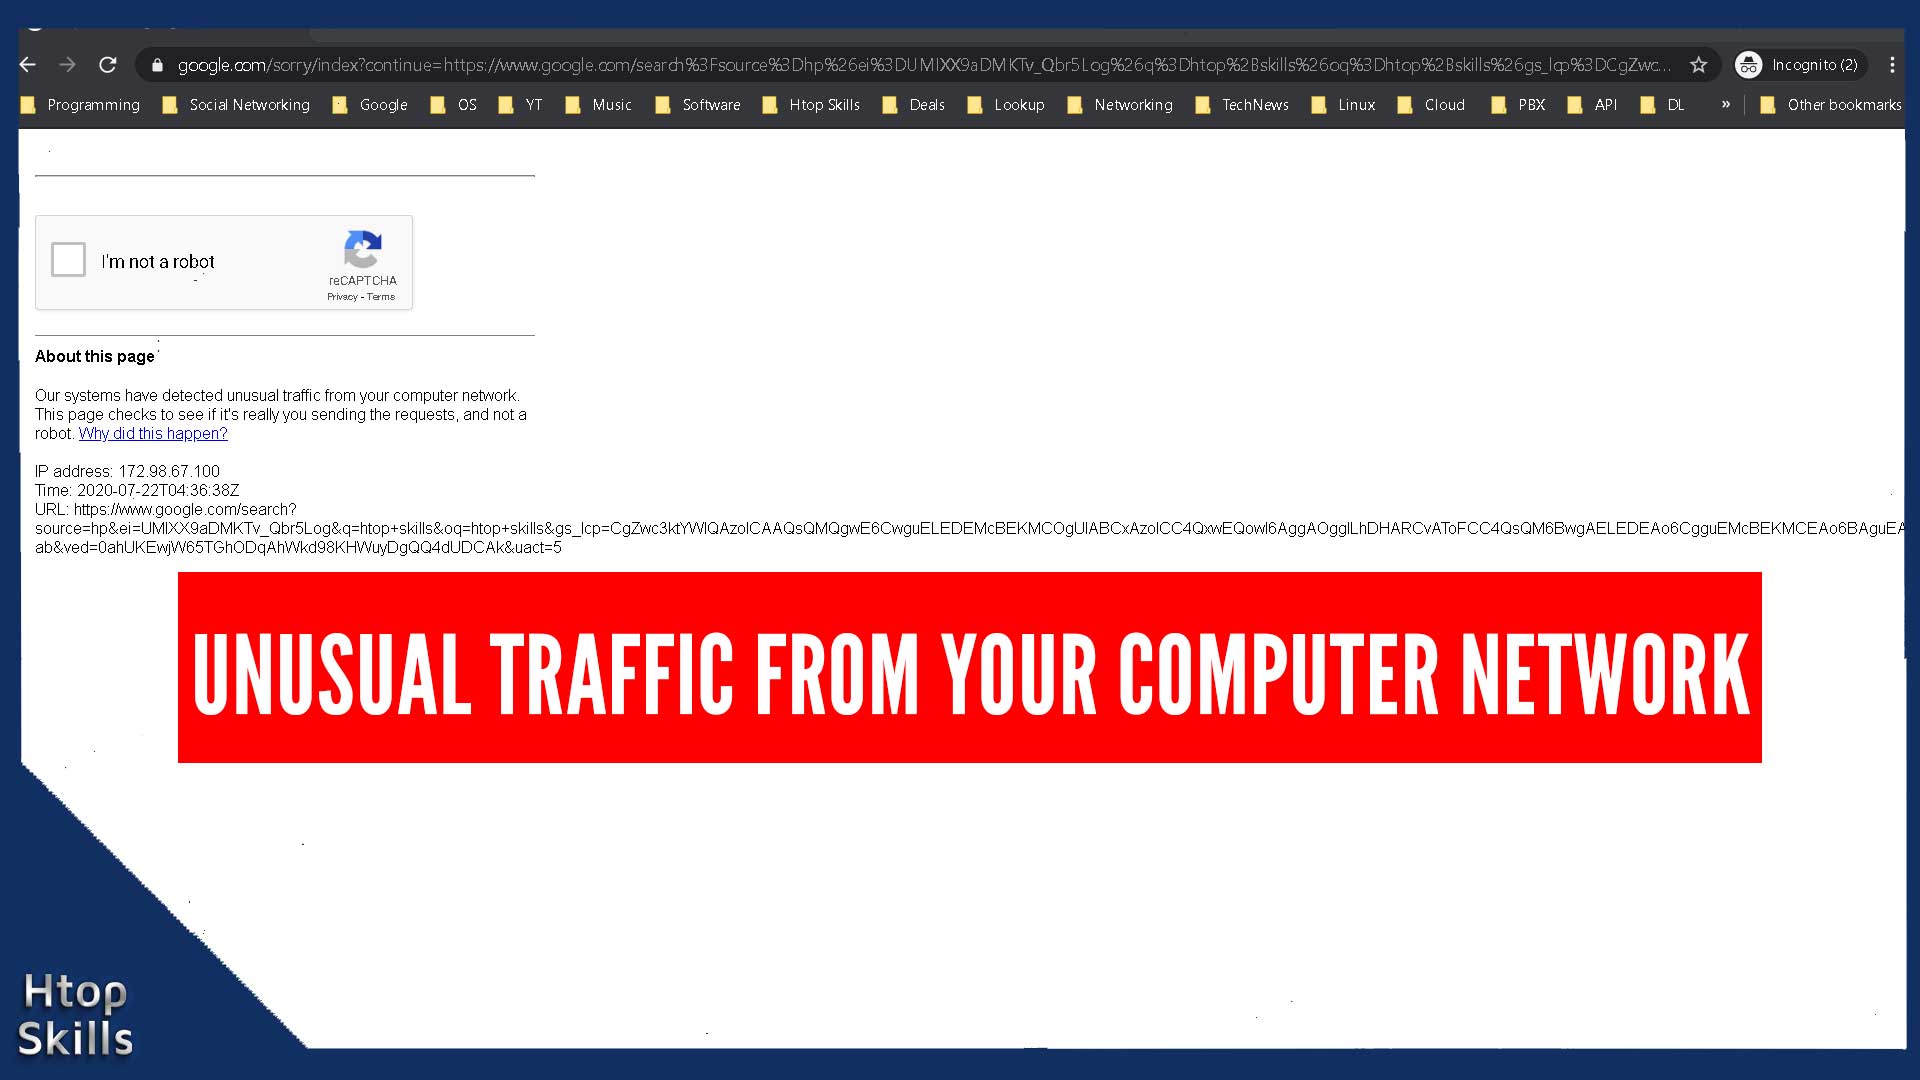 Image contains error message on google.com “Unusual traffic from your computer network”